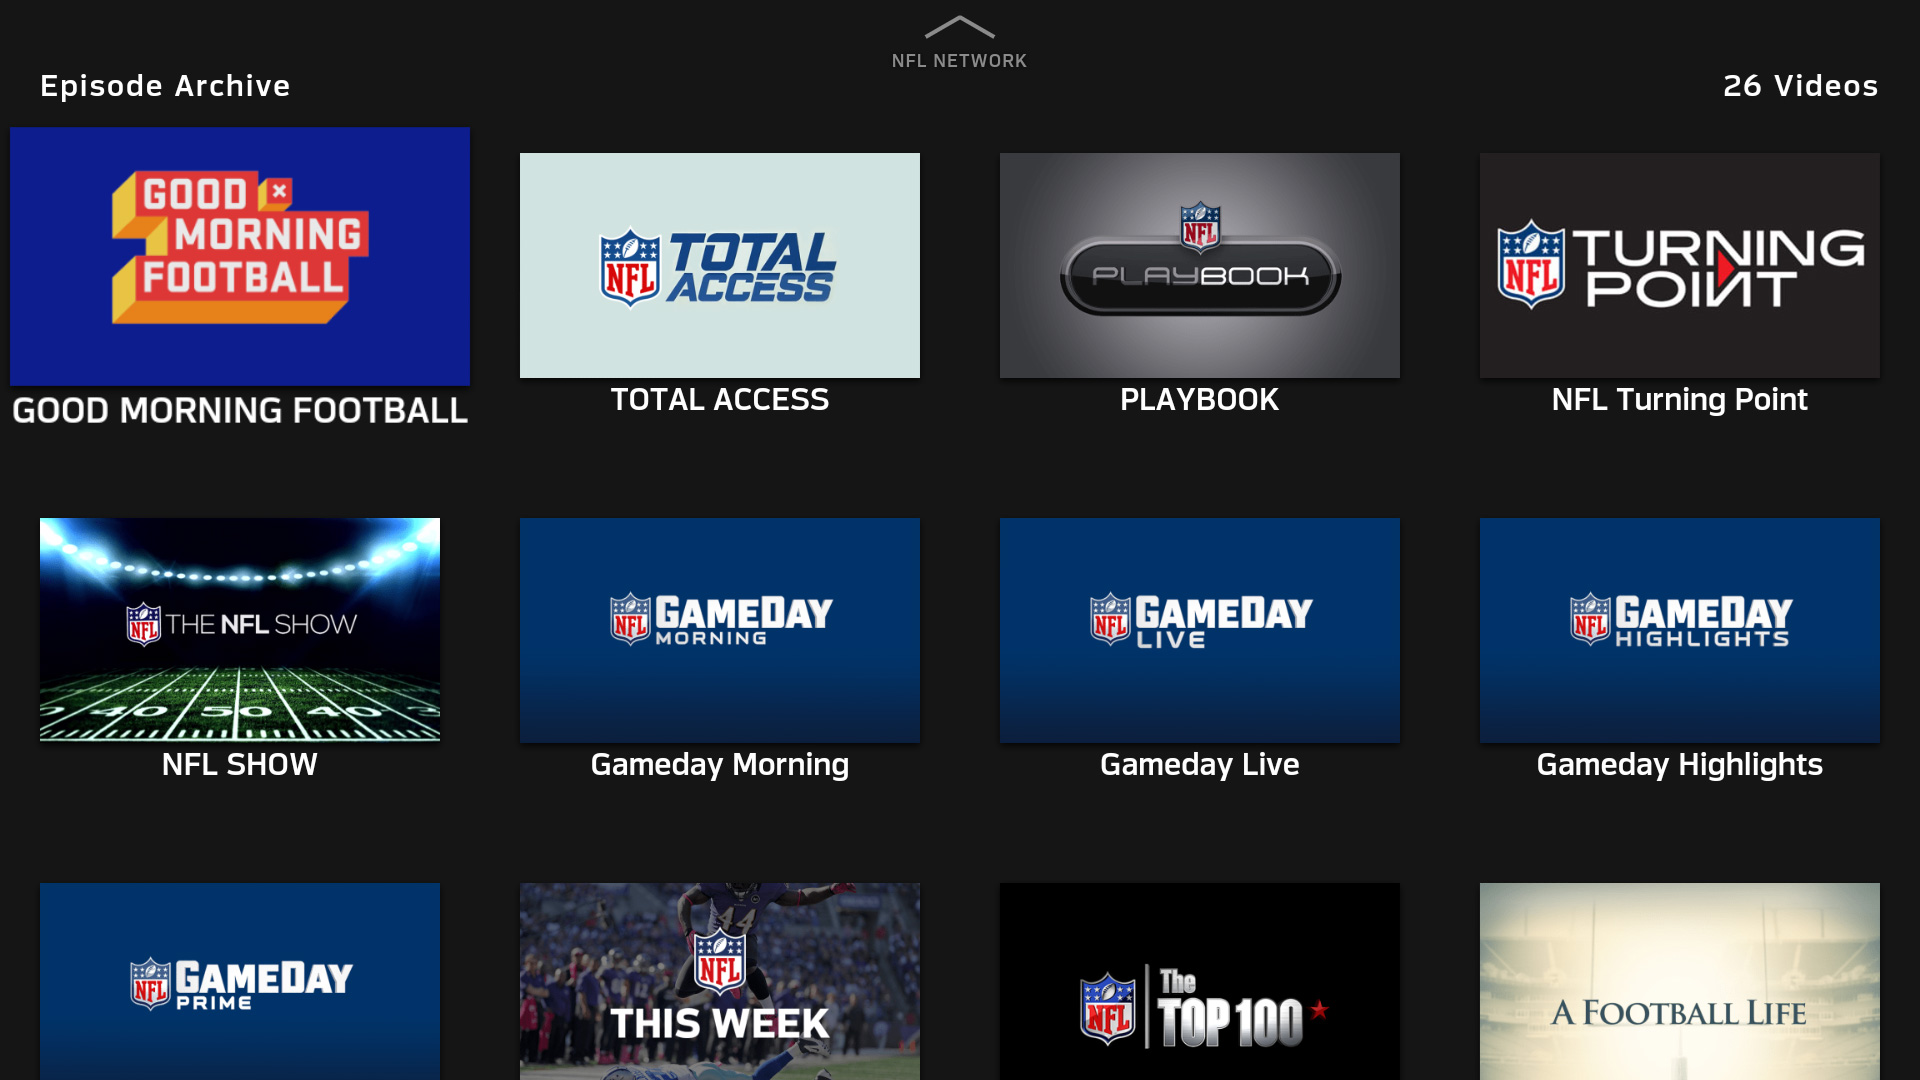 how much is nfl game pass in europe